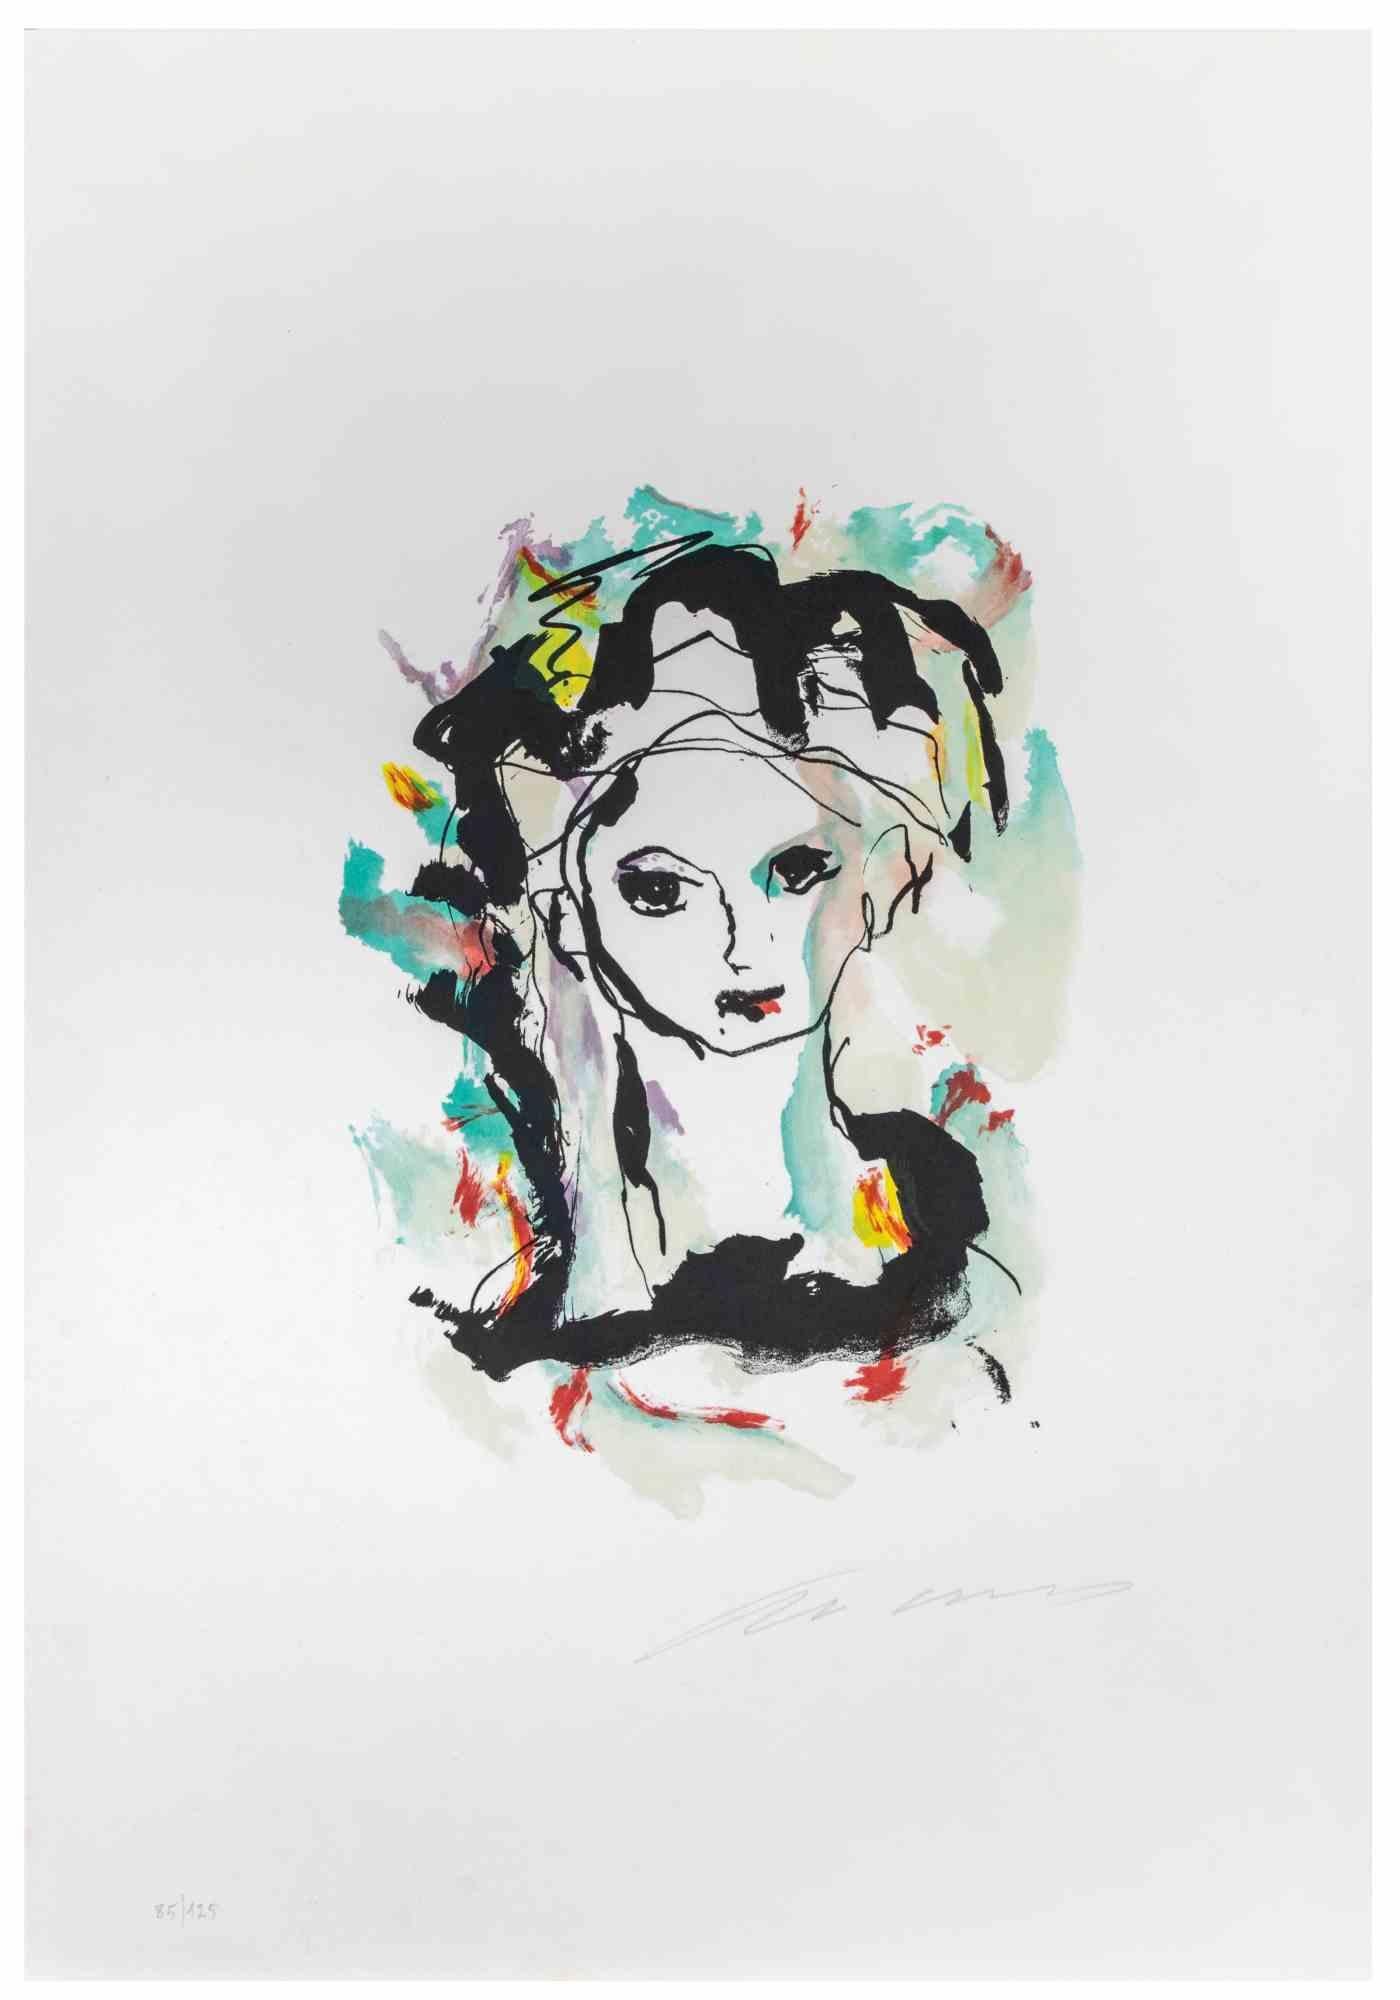 Portrait is a Lithograph realized by Ernesto Treccani in 1970s.

Limited edition of 125, editor "La Nuova Foglio SPA".

Very good condition on a white cardboard.

Hand-signed and numbered by the artist with pencil on the lower margin.

Ernesto